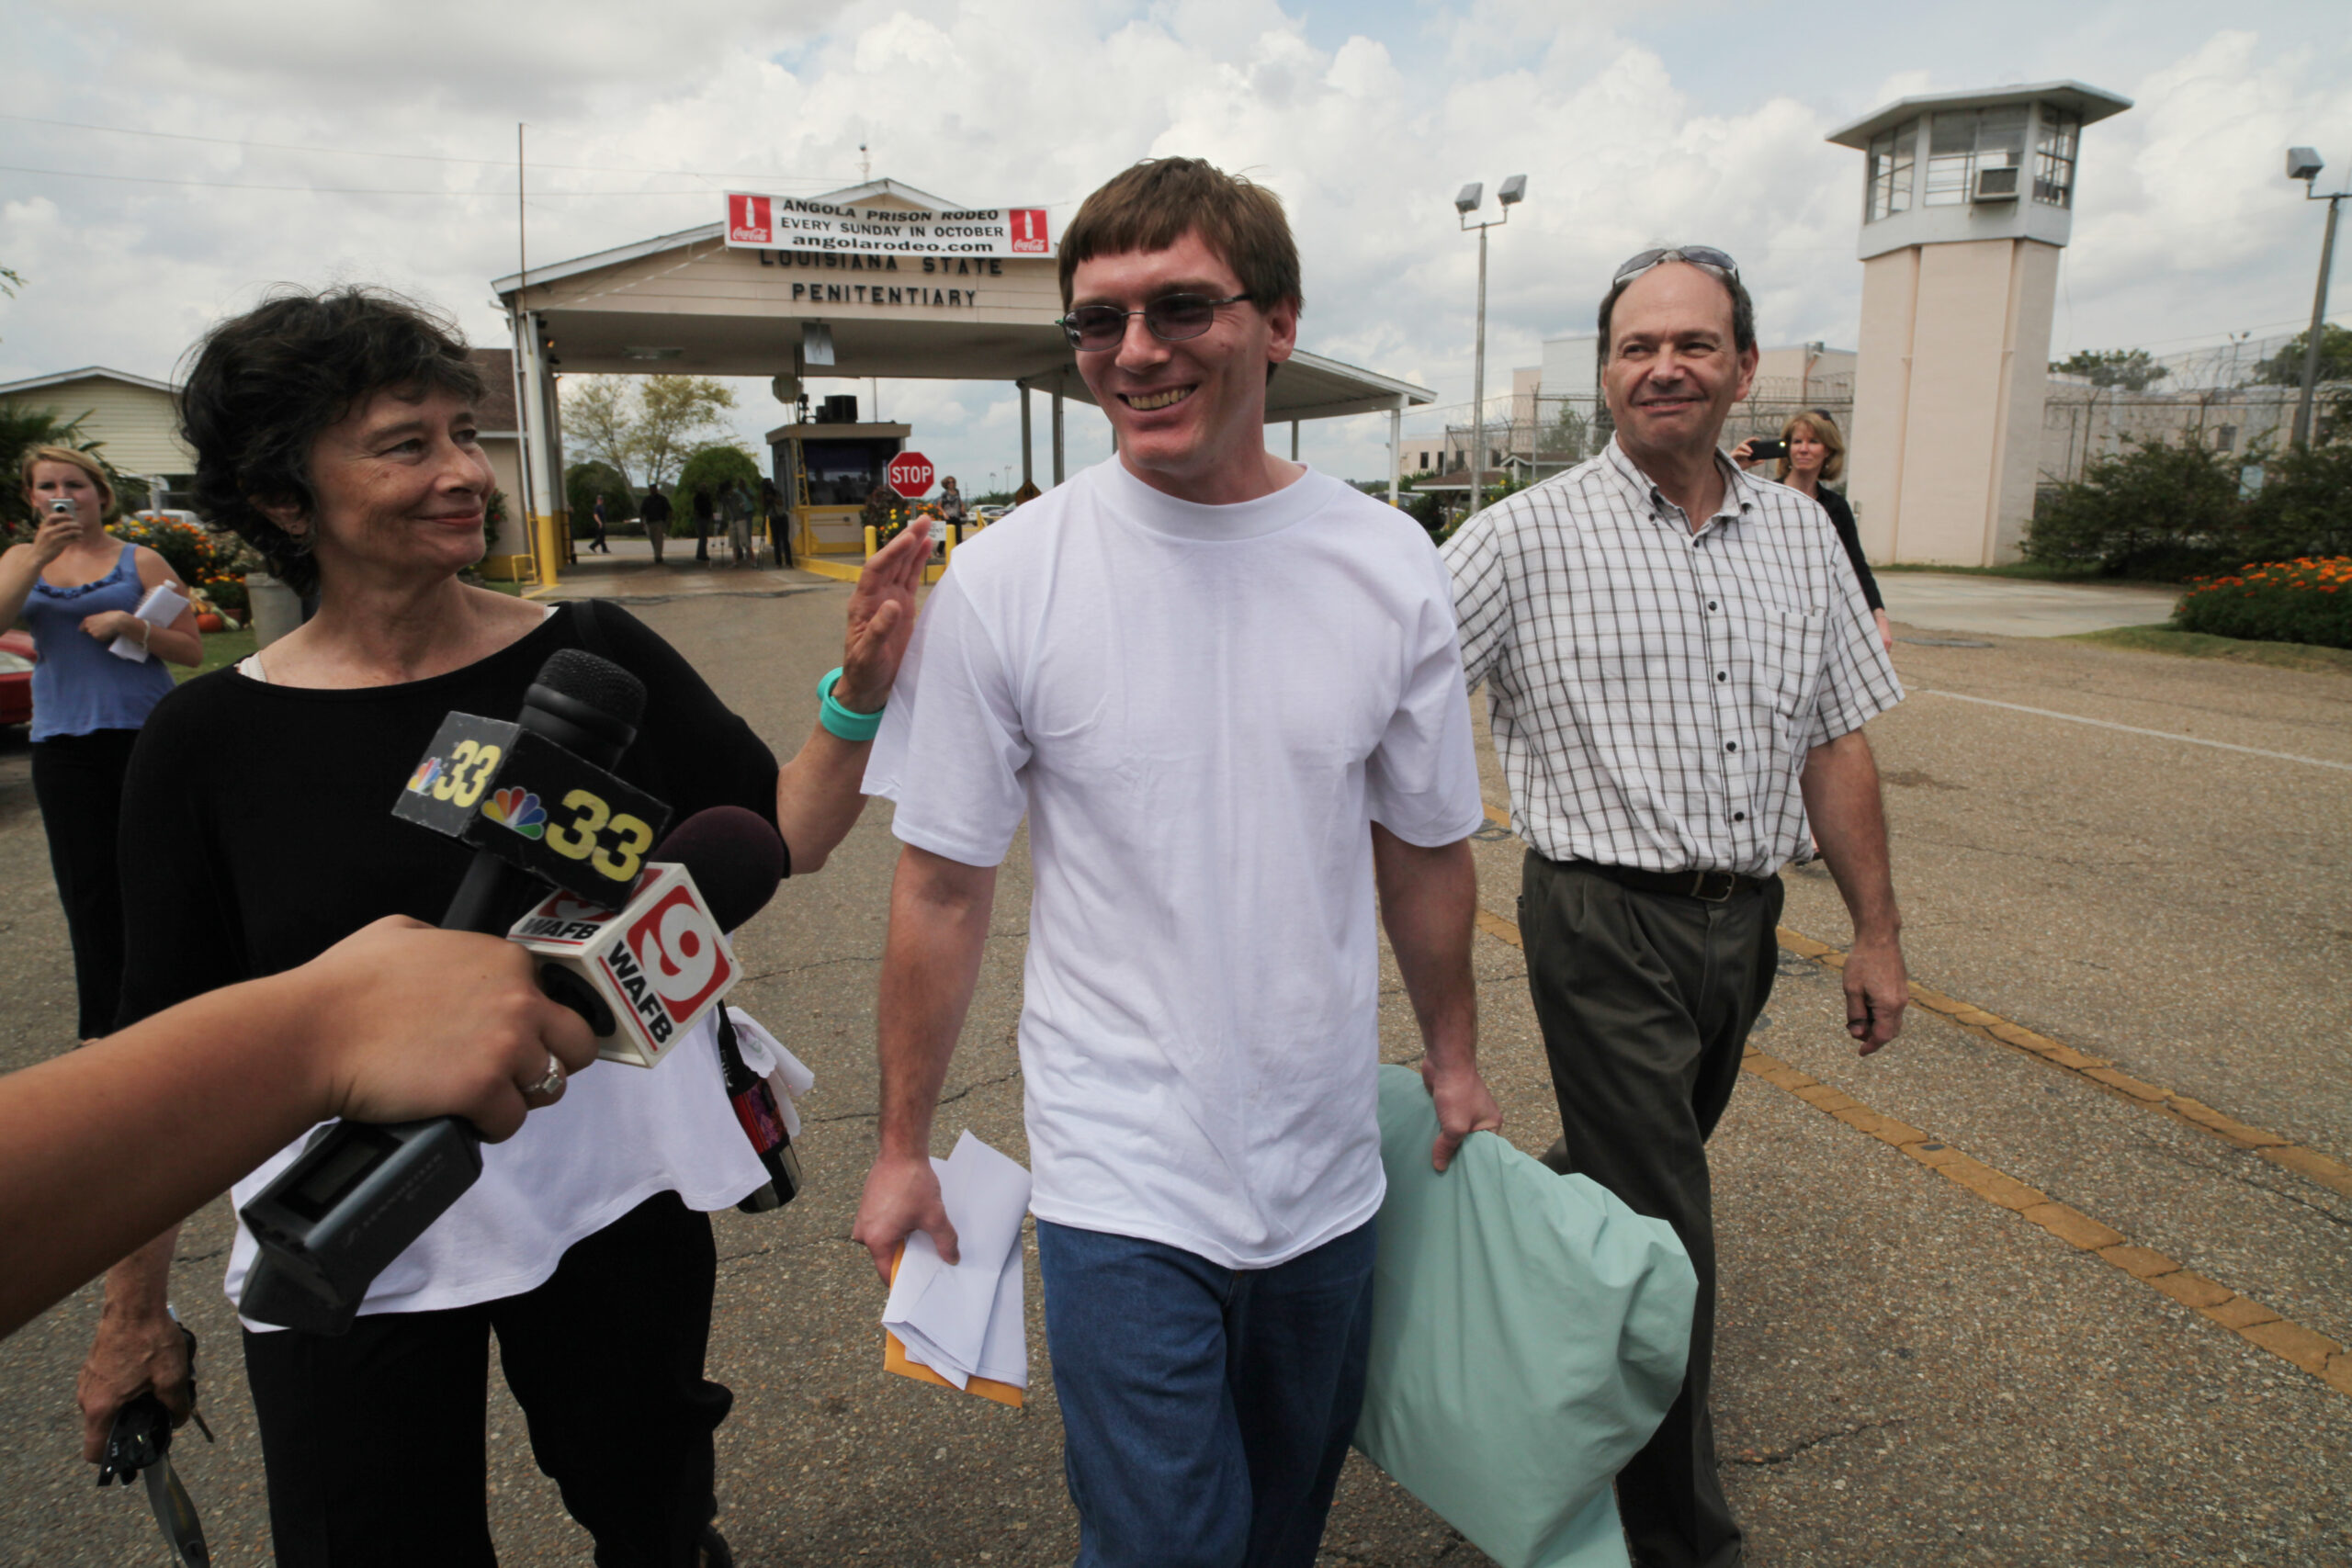 Damon Thibodeaux (center) on the day of his release in 2012. ©Calhoun McCormick